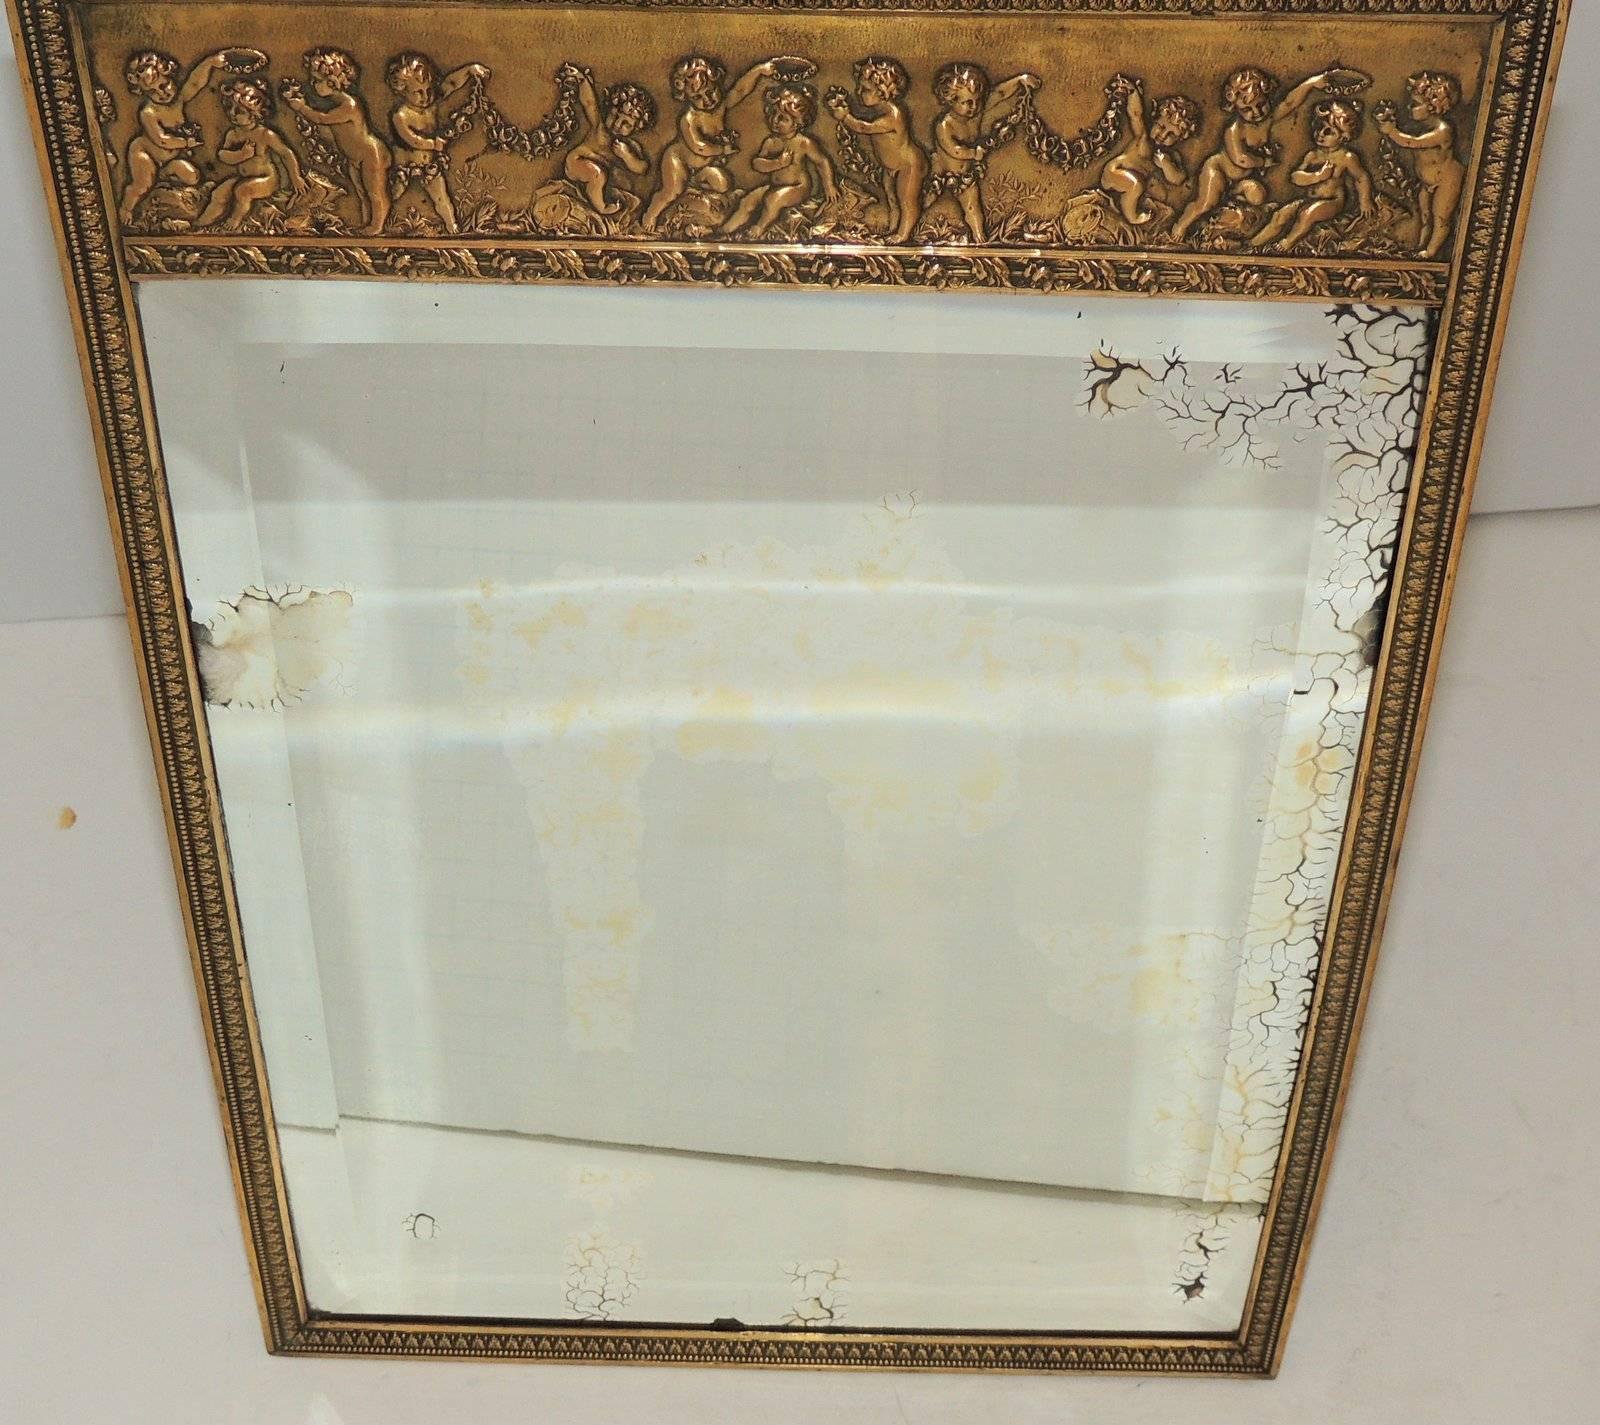 Wonderful antique beveled edge mirror frame with Cherubs across the top and etched detail surrounding the sides. The mirror has beautiful age to the silver and has easel back or ring to hang.

Measures: 16 in. high x 11.25 in. wide.